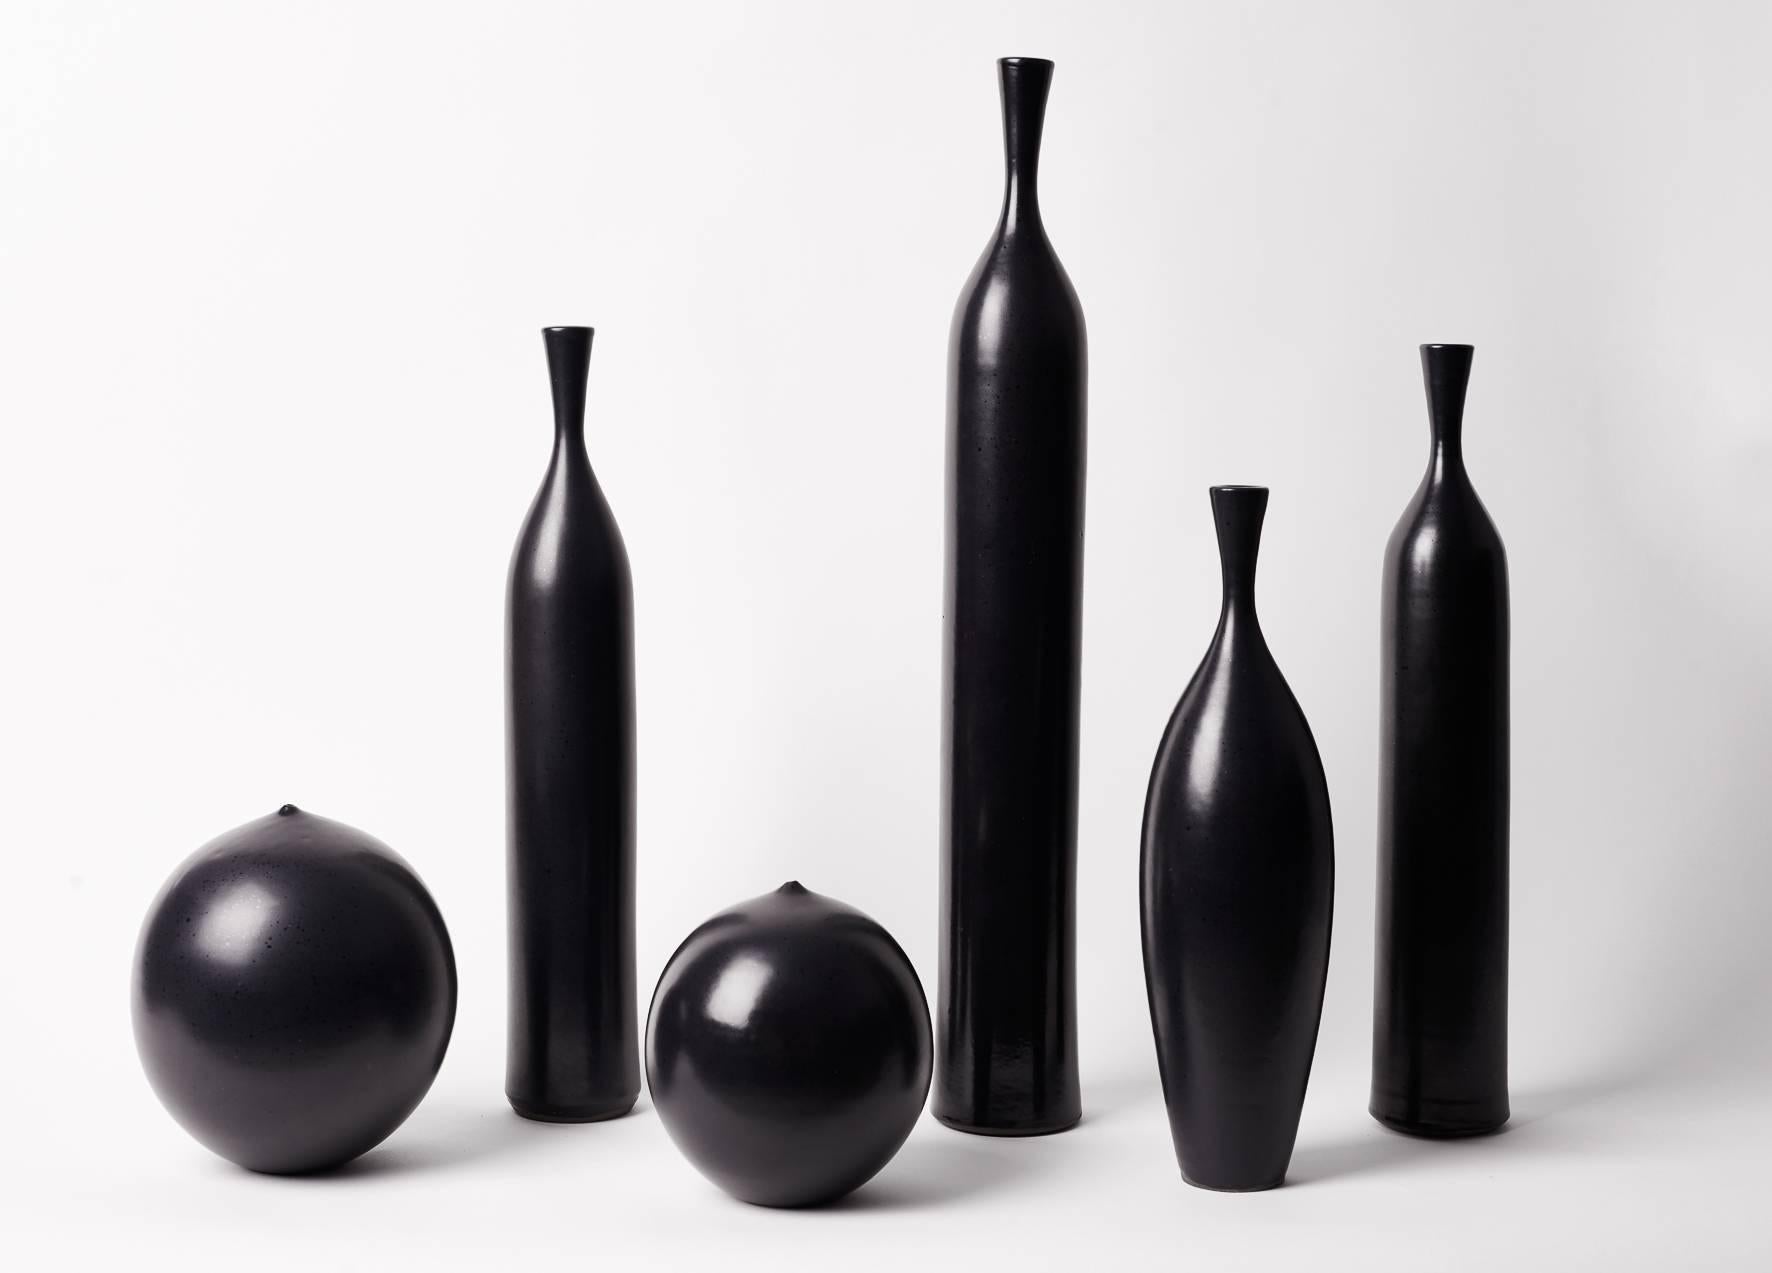 Set of six pieces: Four bottles and two ball vases, black enameled earthenware signed with Jacques Bro stamp.

Heights: 52/40/39/32/19/16 cm.

Between 1950 and 1970, Jacques Bro used to work at Atelier Madoura in Vallauris, France, where he